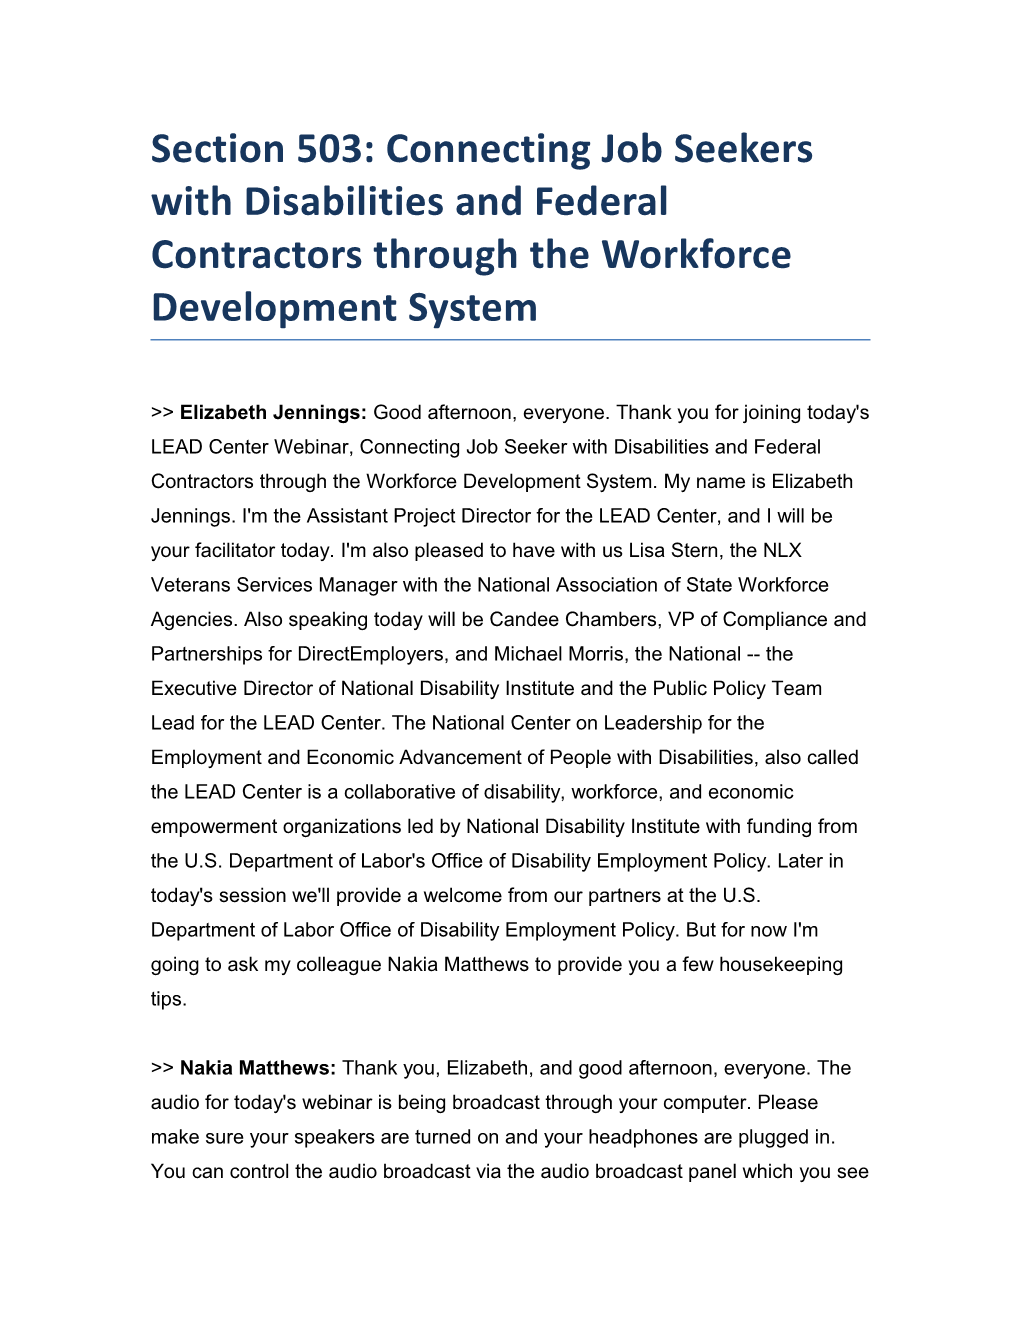 Section 503: Connecting Job Seekers with Disabilities and Federal Contractors Through The